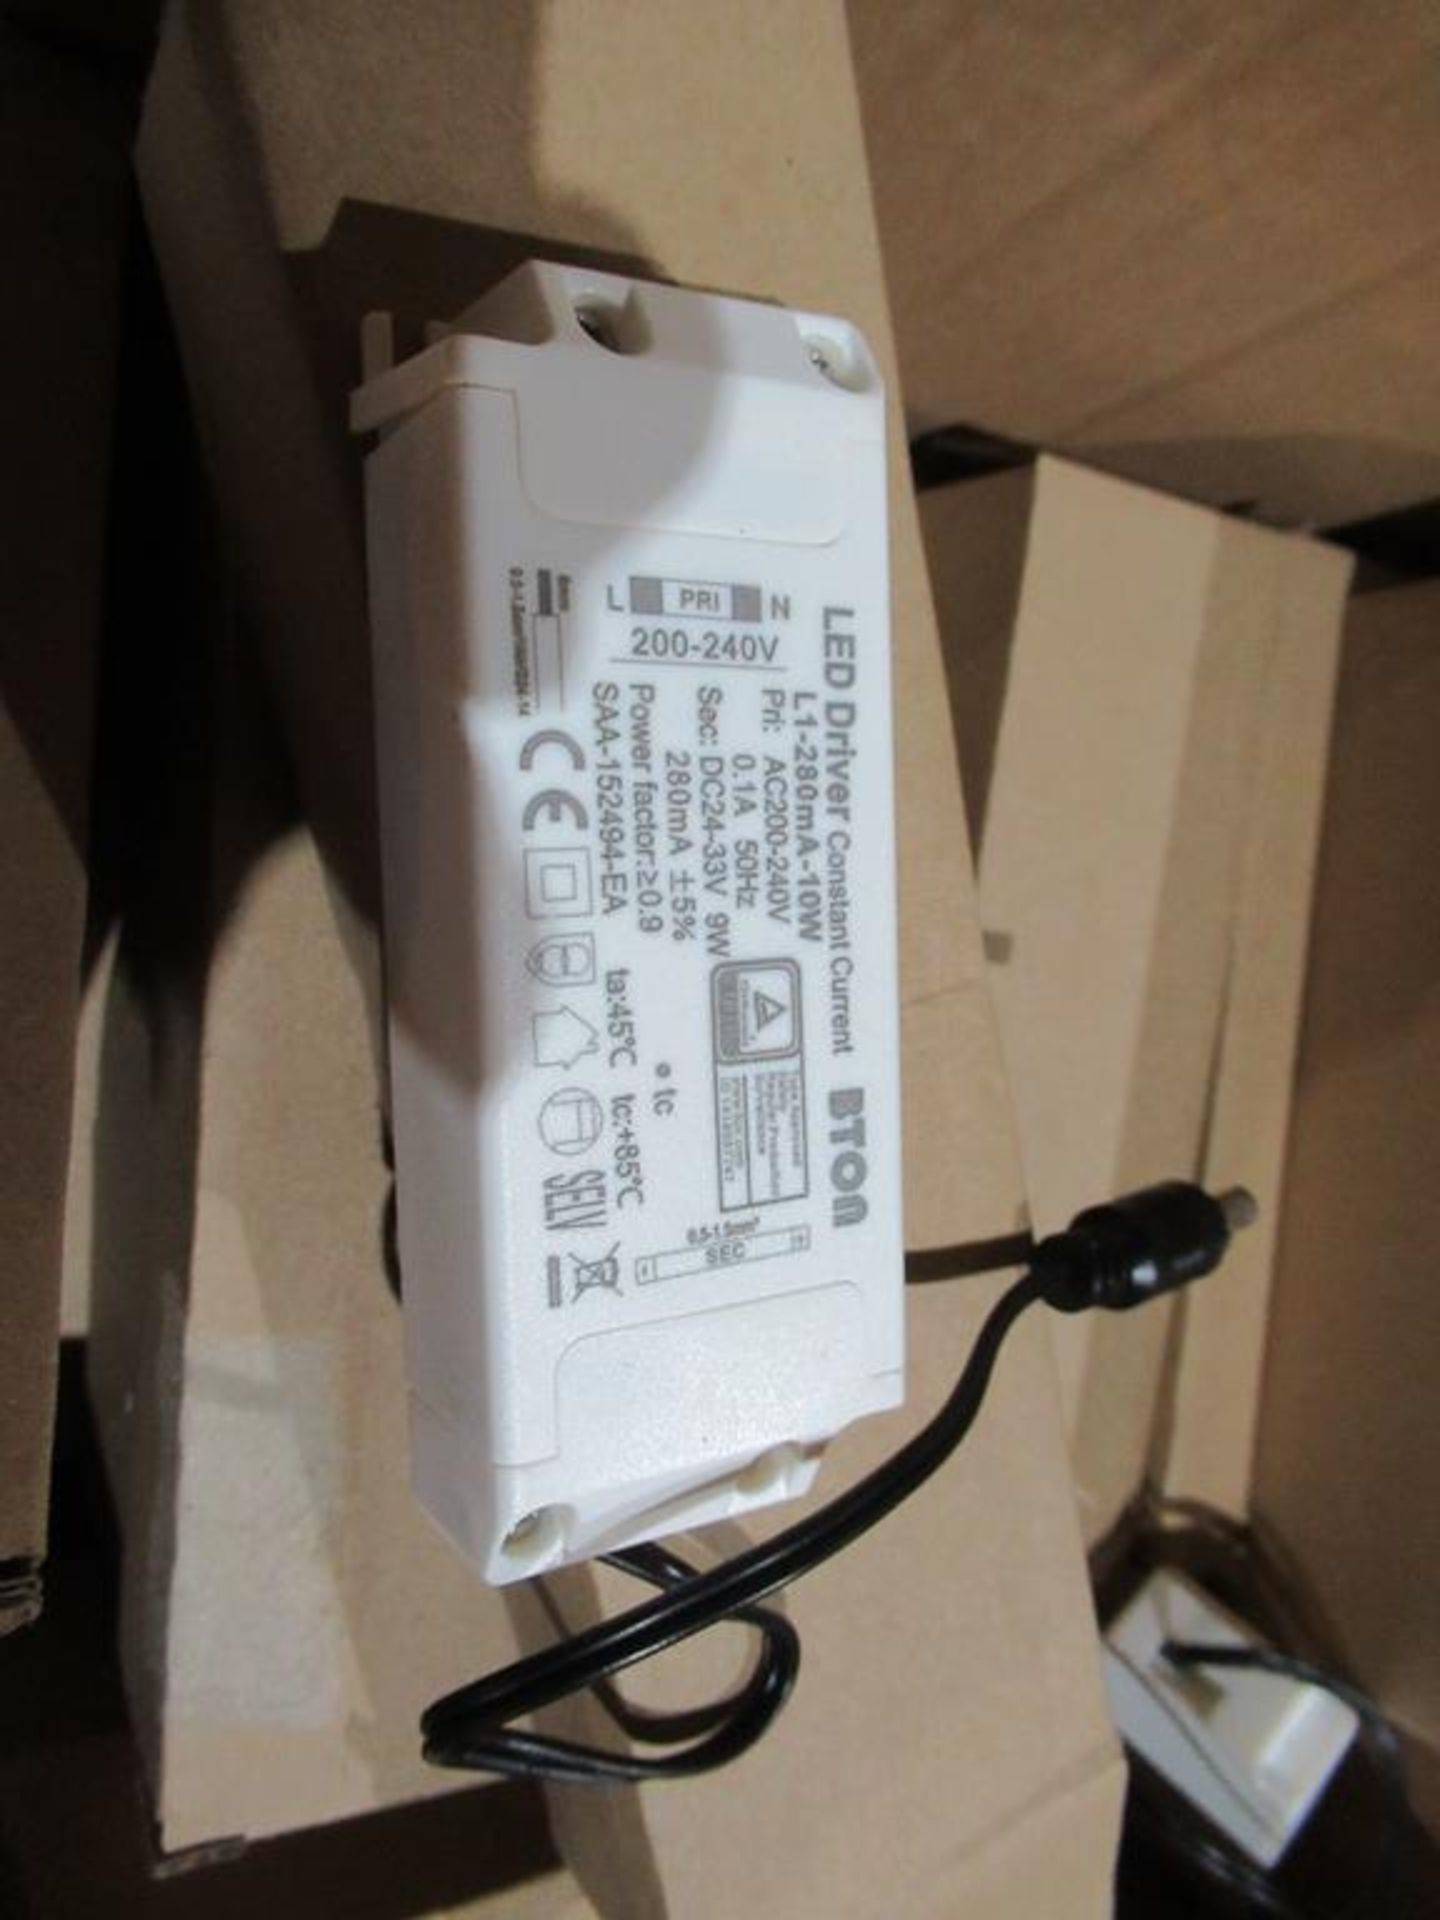 130 x LED Driver L1-280mA 10W Approx Qty OEM Trade Price £ 560 - Image 4 of 4